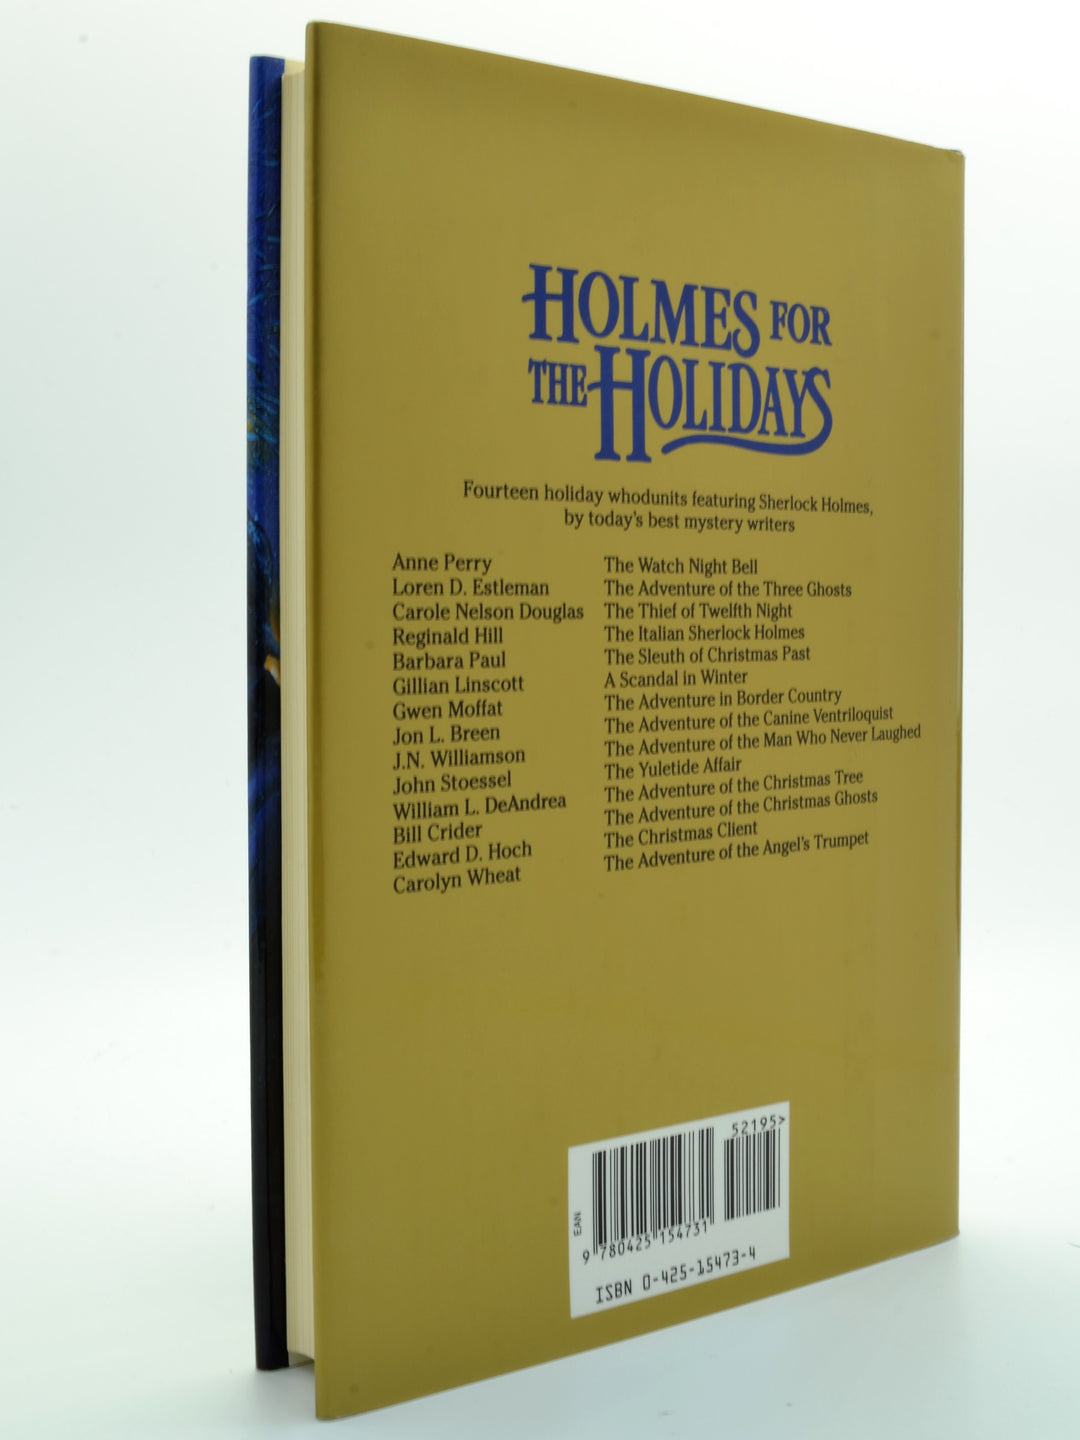 Perry, Anne et al. - Holmes for Holidays | image4